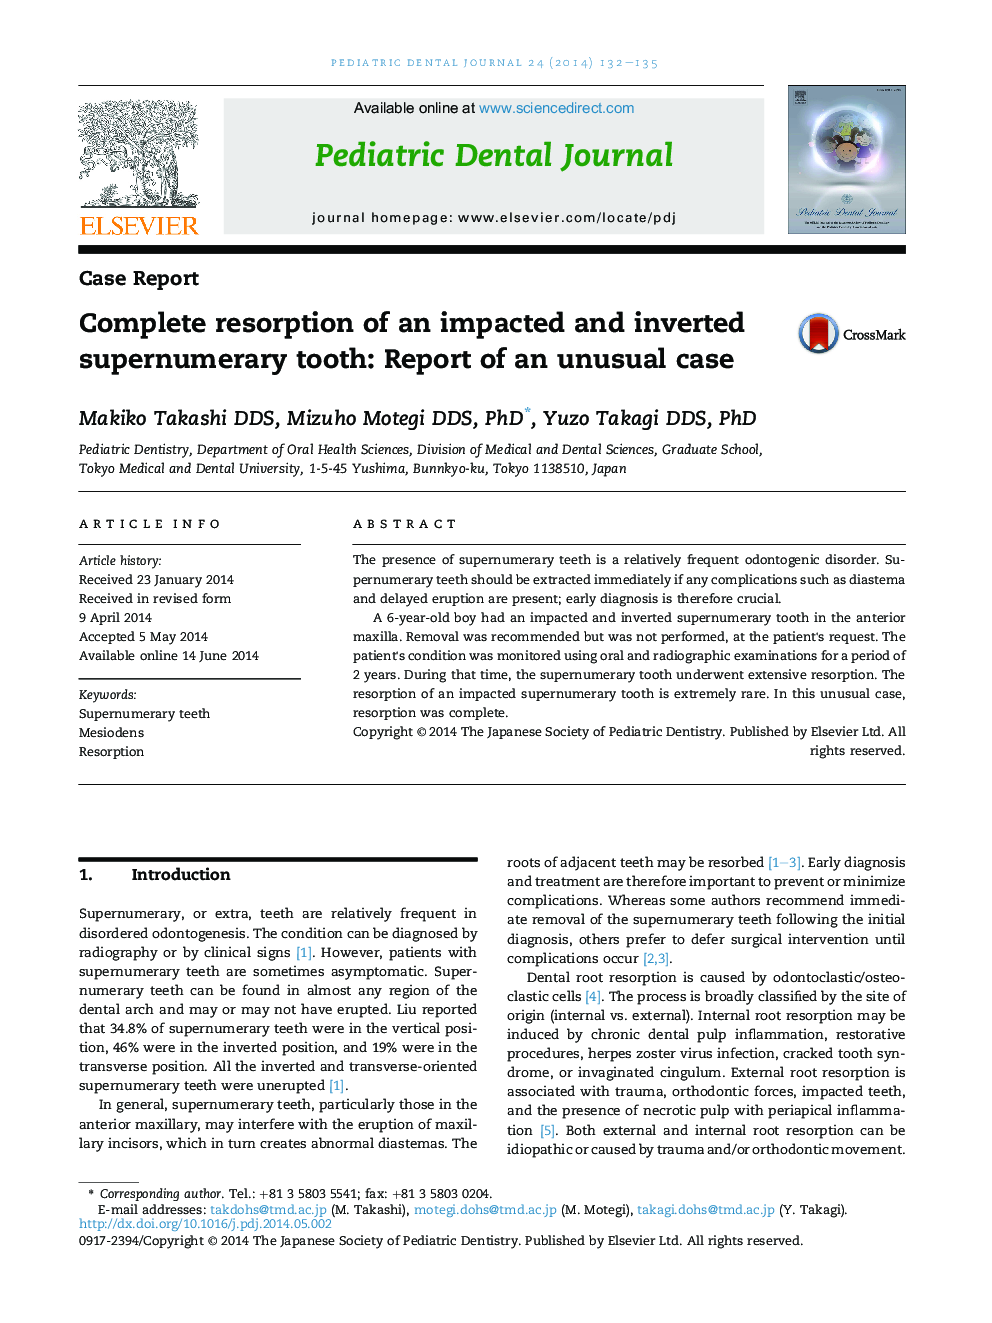 Complete resorption of an impacted and inverted supernumerary tooth: Report of an unusual case